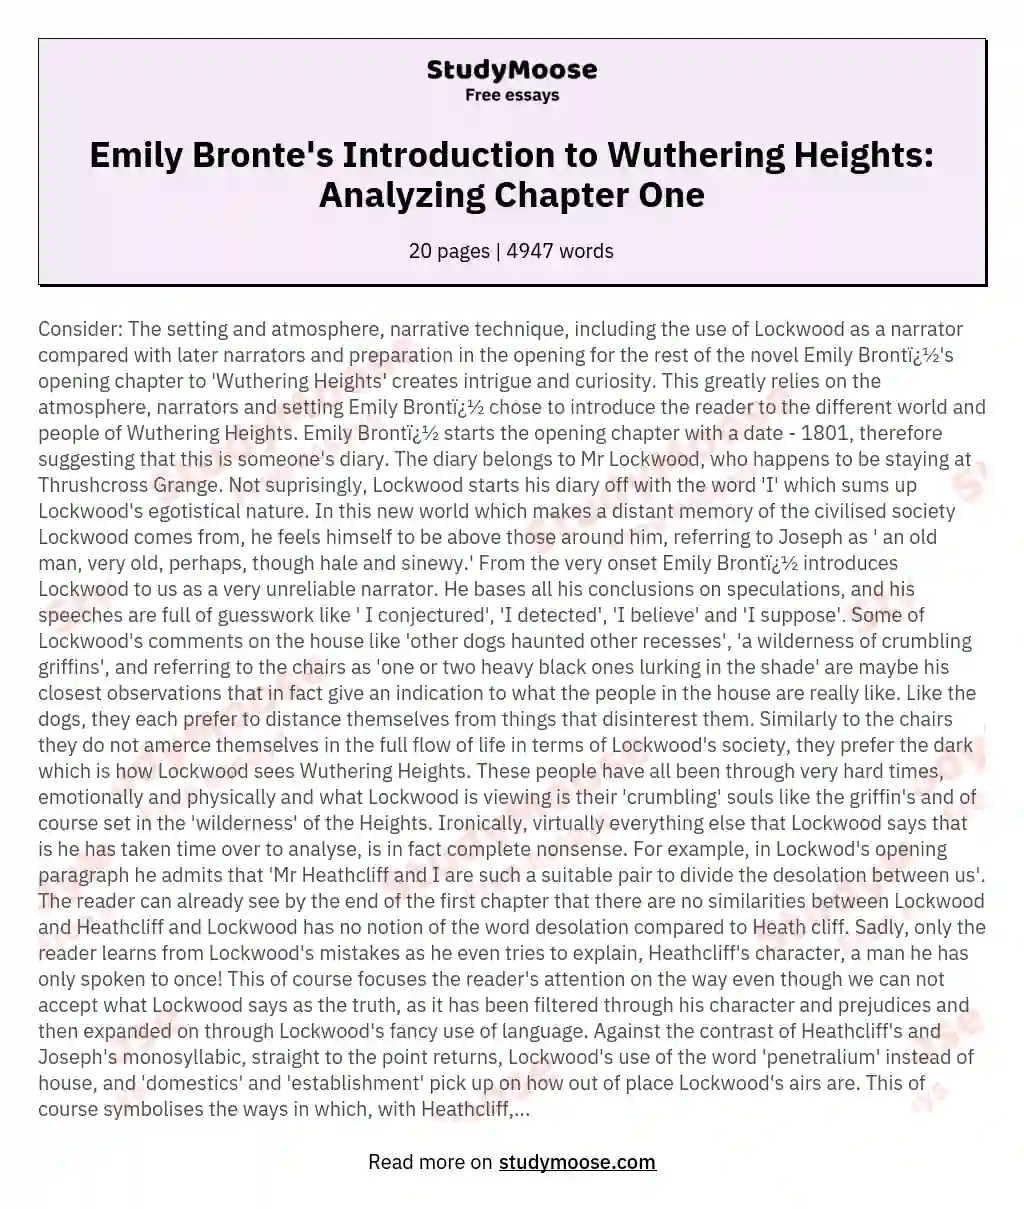 Refer to chapter one of Wuthering Heights and how Emily Brone introduces her reader to the novel